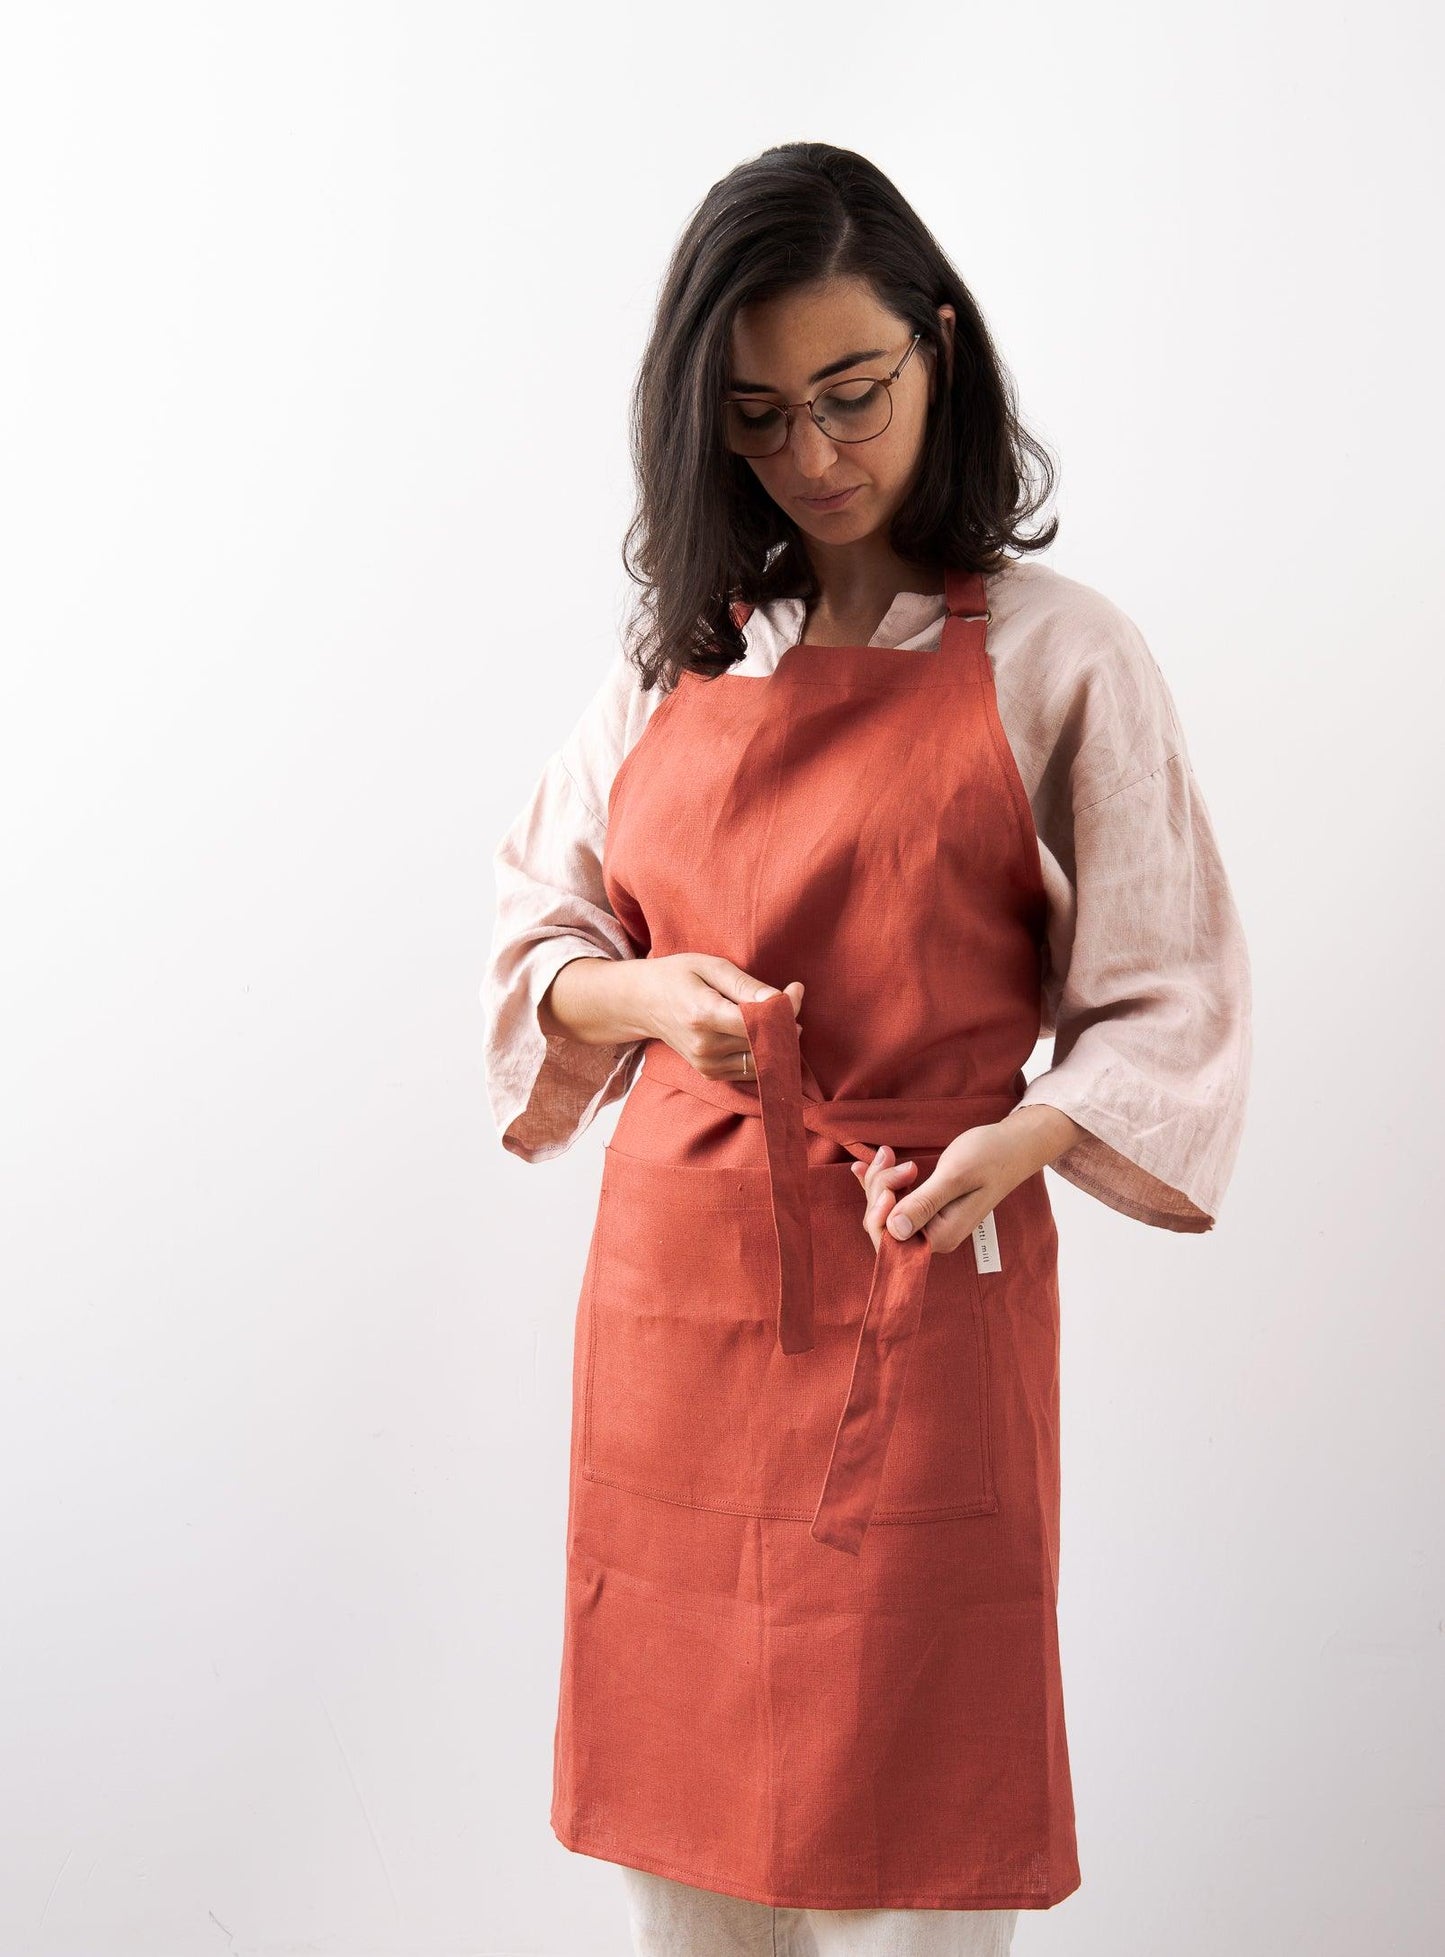 woman tying a red apron in front of a white wall